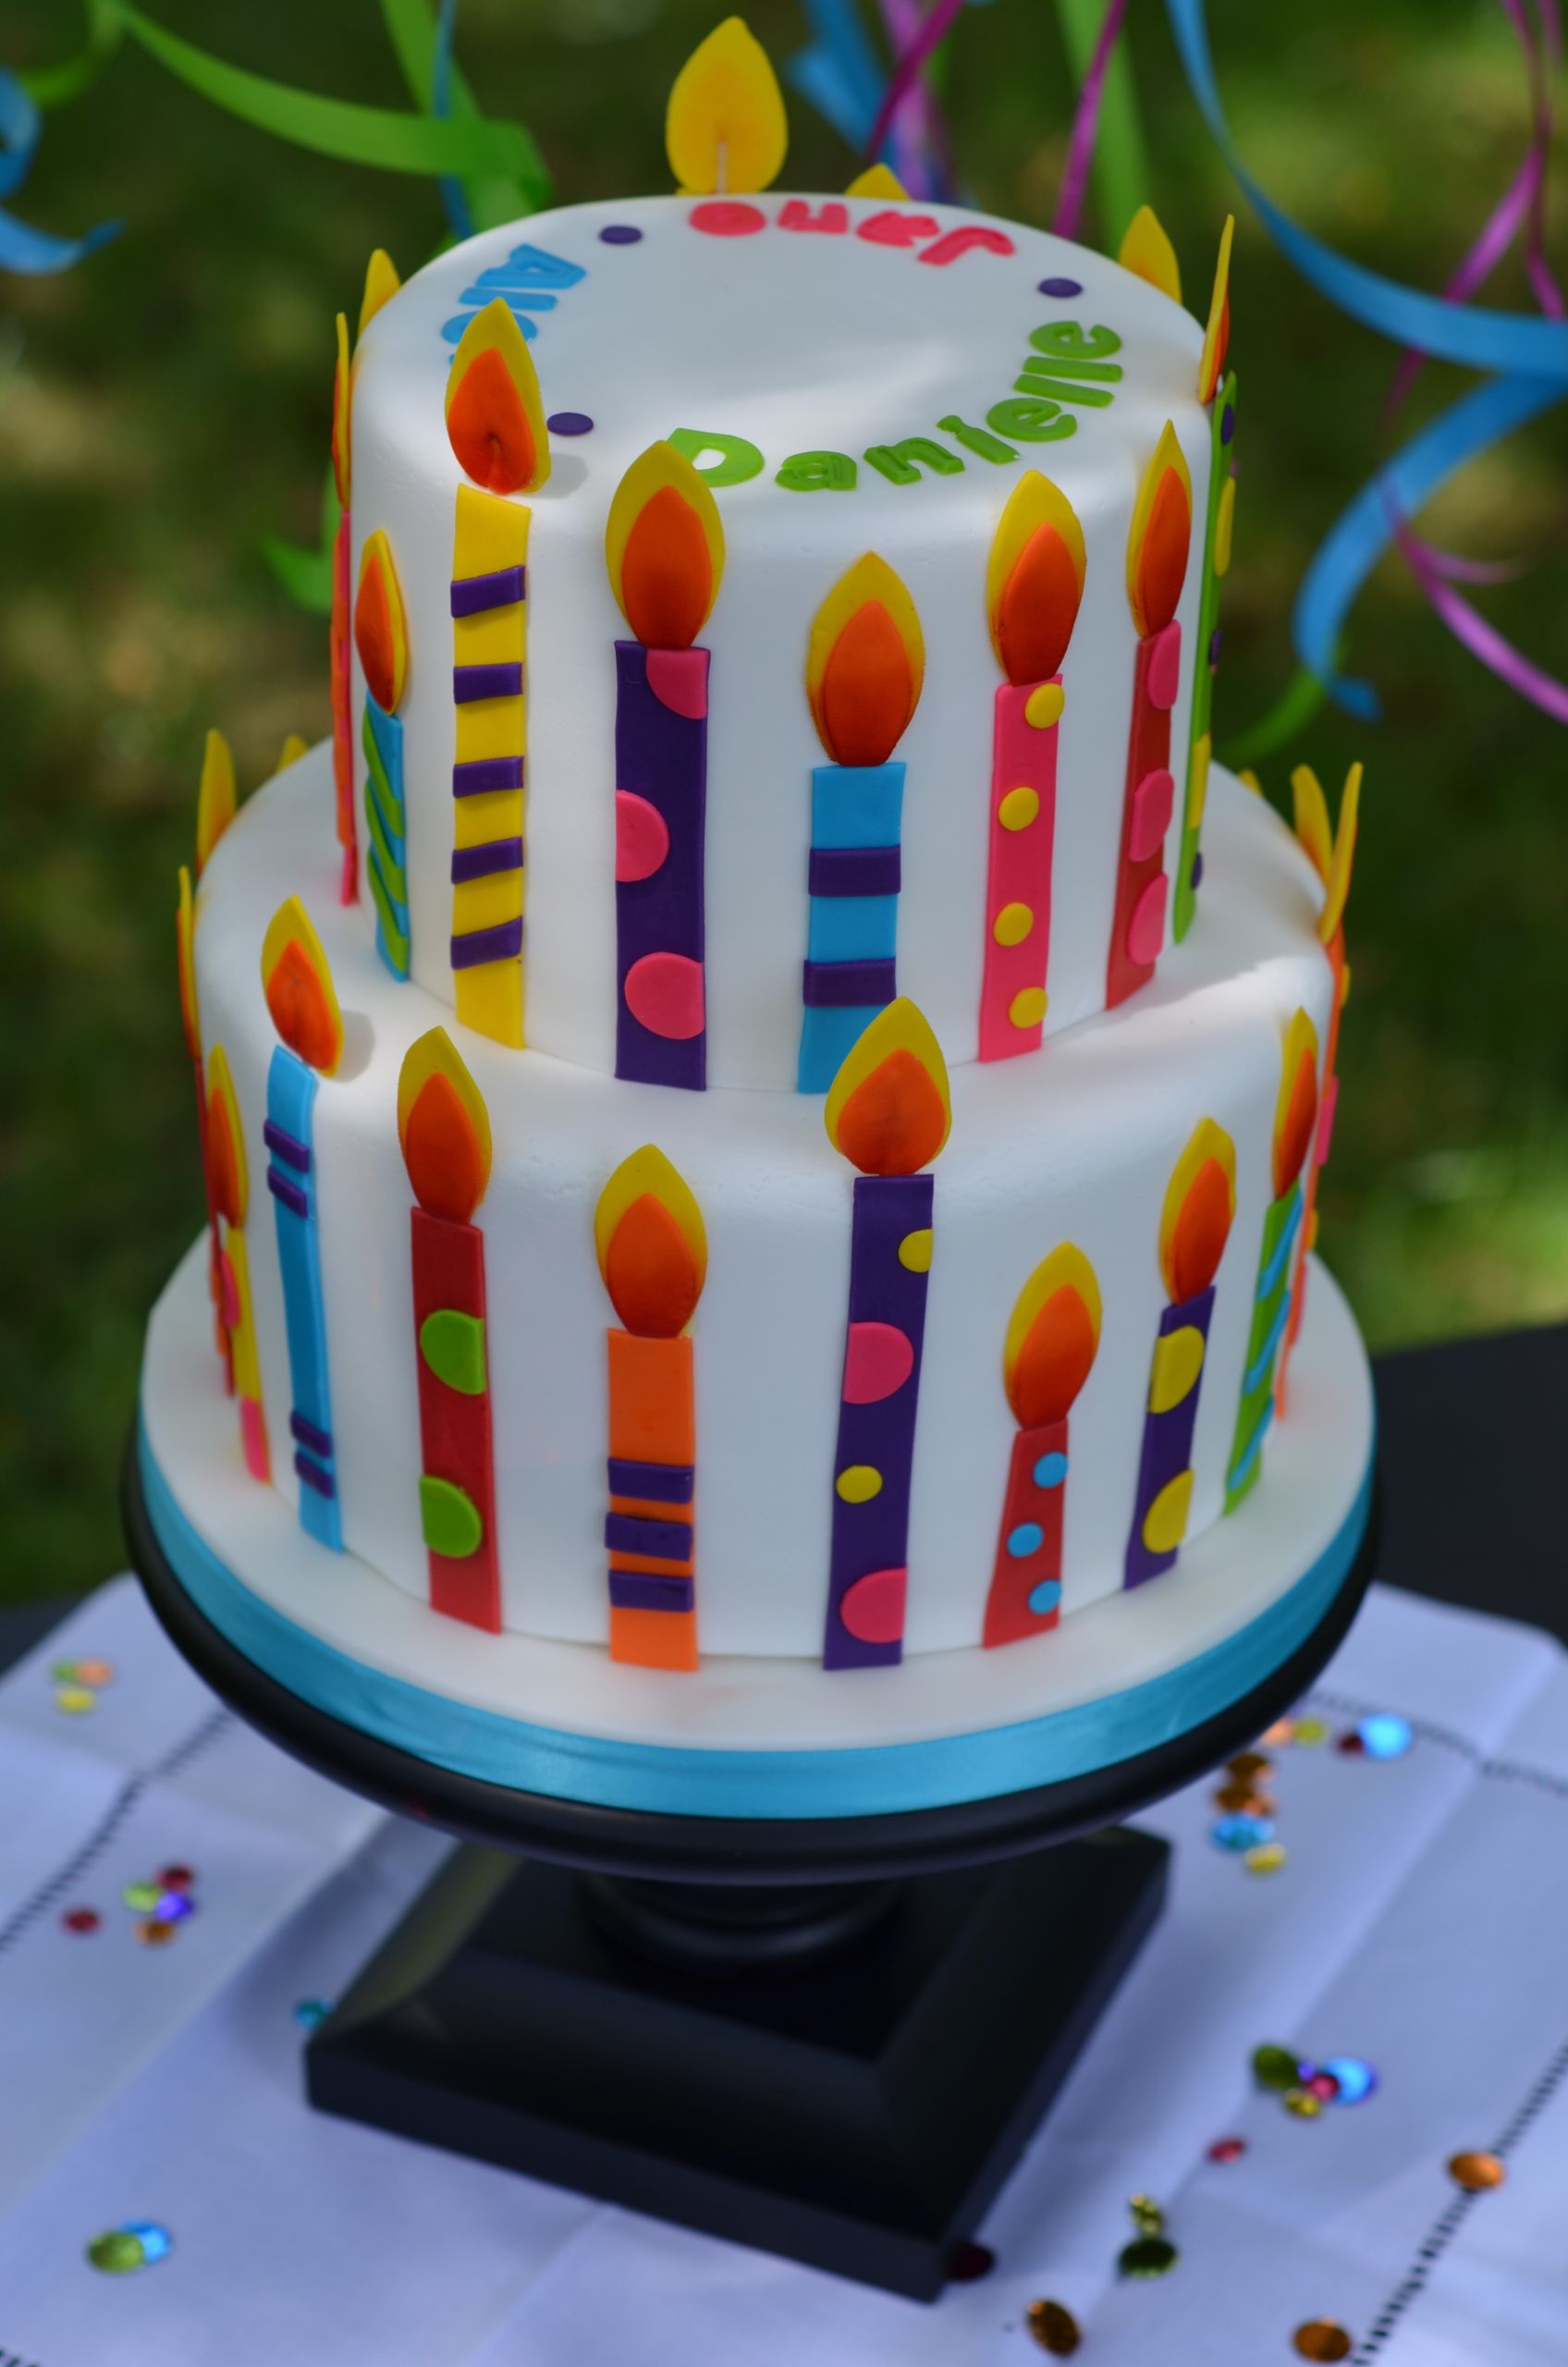 Birthday Cake with Candles Beautiful Colorful Fondant Candle Birthday Cake Cakecentral